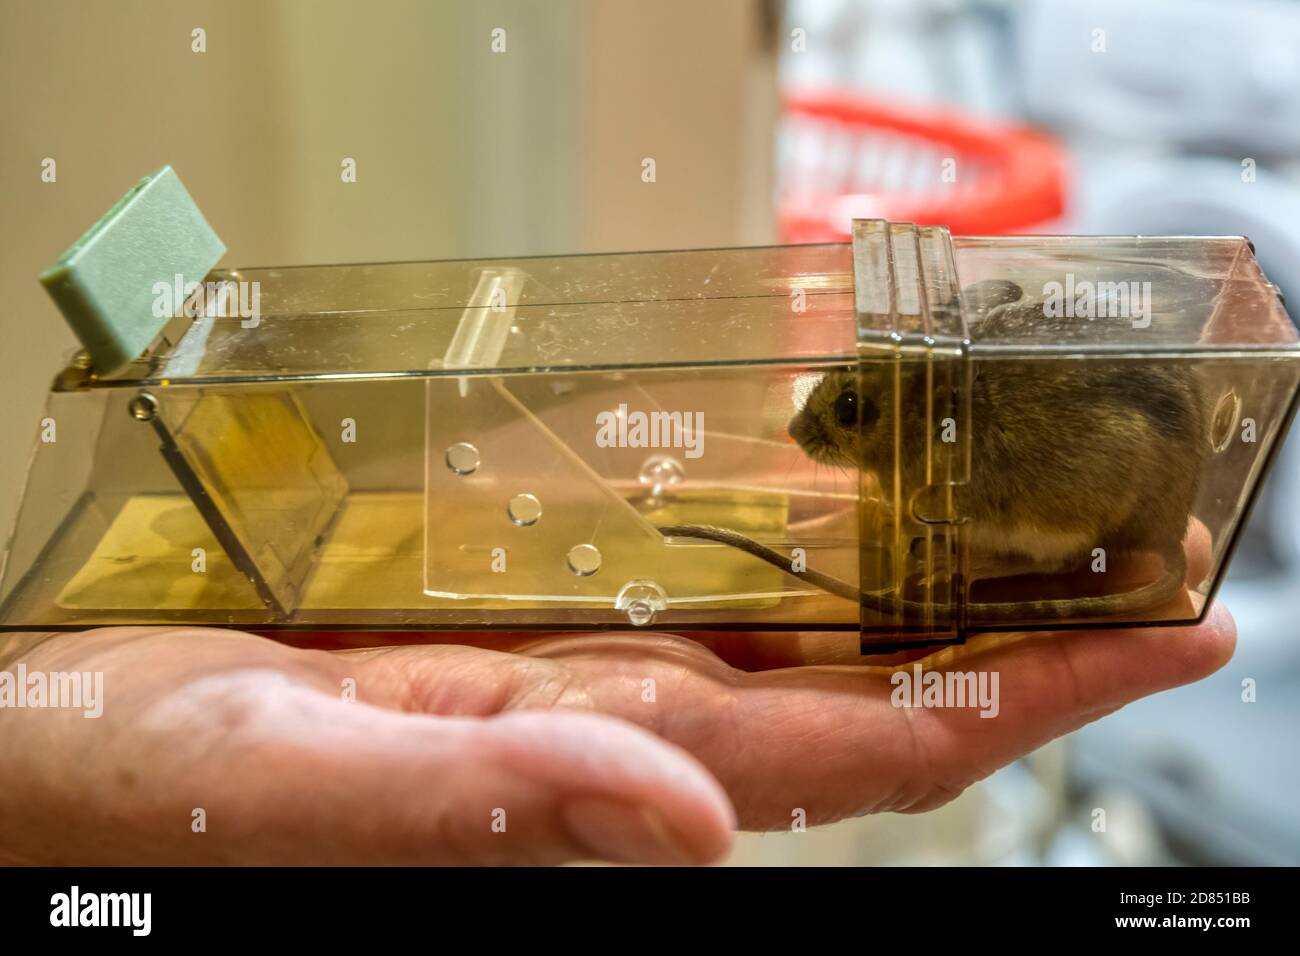 https://c8.alamy.com/comp/2D851BB/field-mouse-or-wood-mouse-apodemus-sylvaticus-caught-in-humane-mouse-trap-2D851BB.jpg